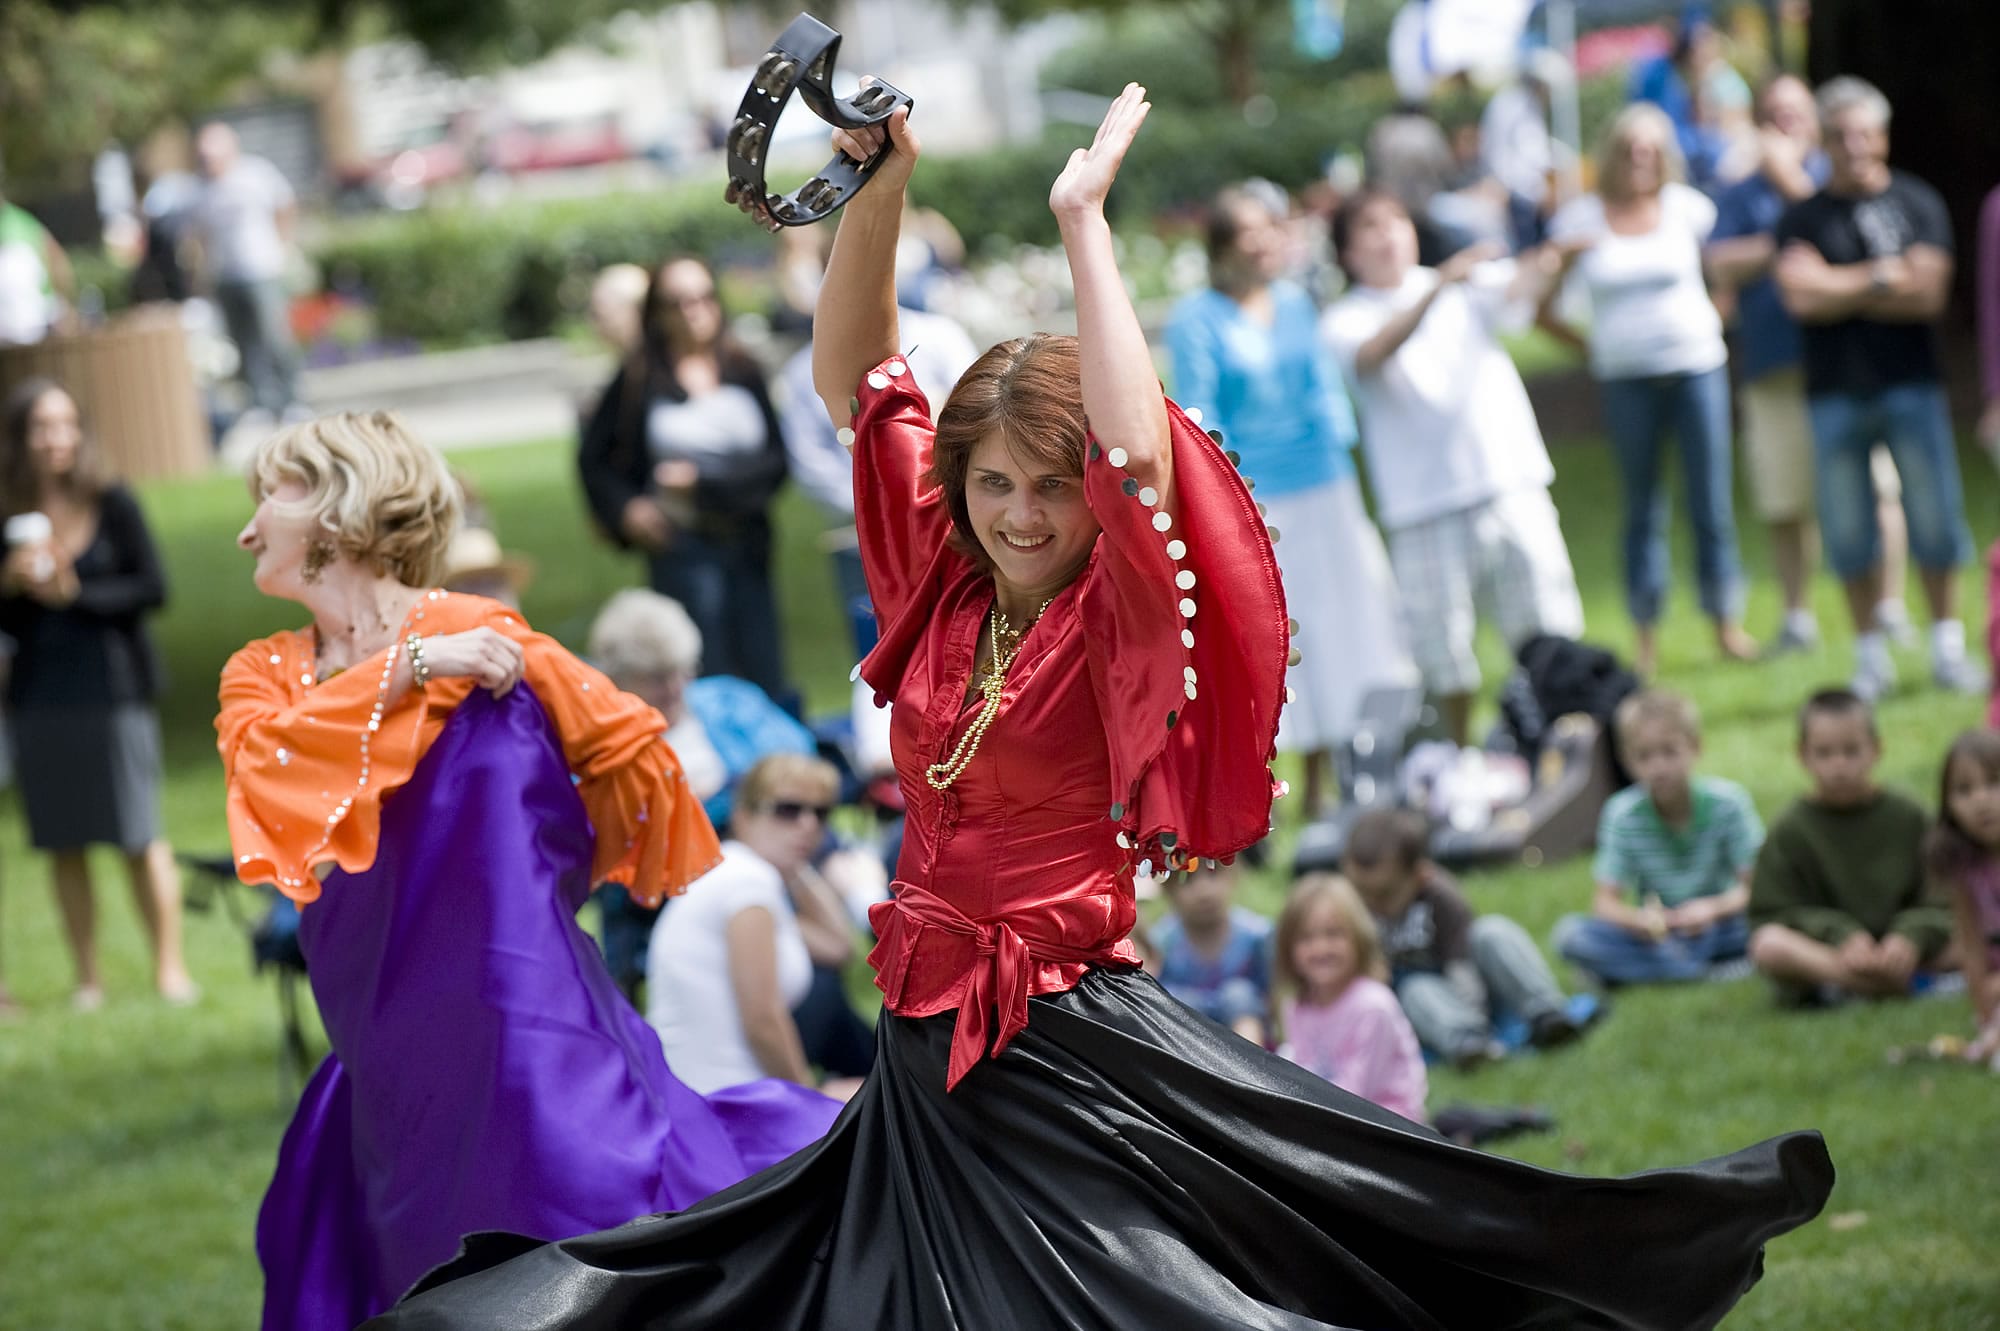 Russian festival brings cultures together The Columbian